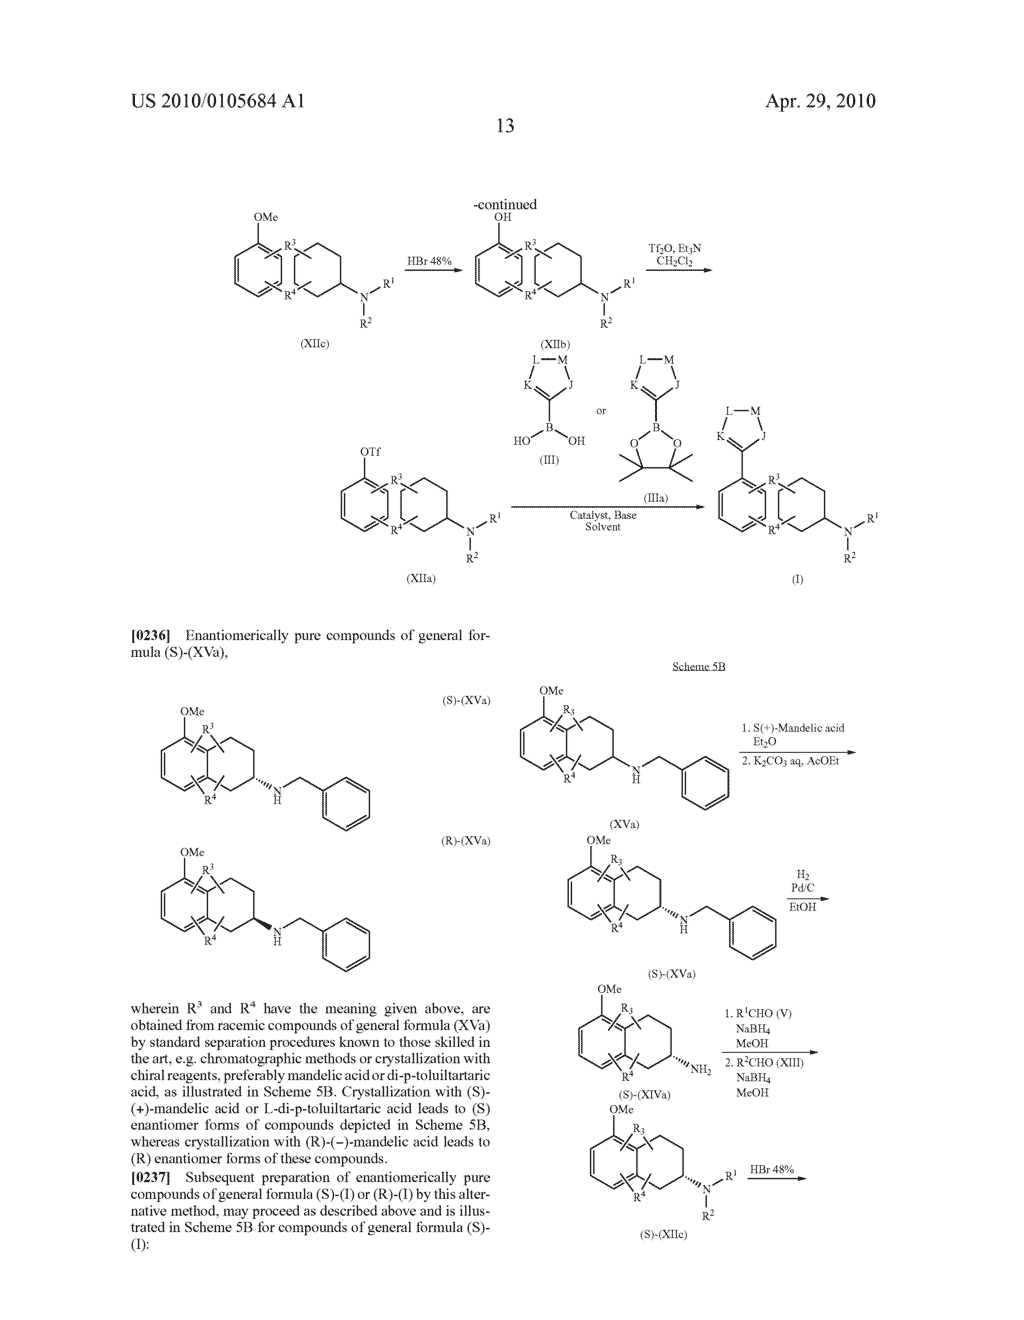 HETEROCYCLYL-SUBSTITUTED-TETRAHYDRO-NAPHTHALEN-AMINE DERIVATIVES, THEIR PREPARATION AND USE AS MEDICAMENTS - diagram, schematic, and image 14